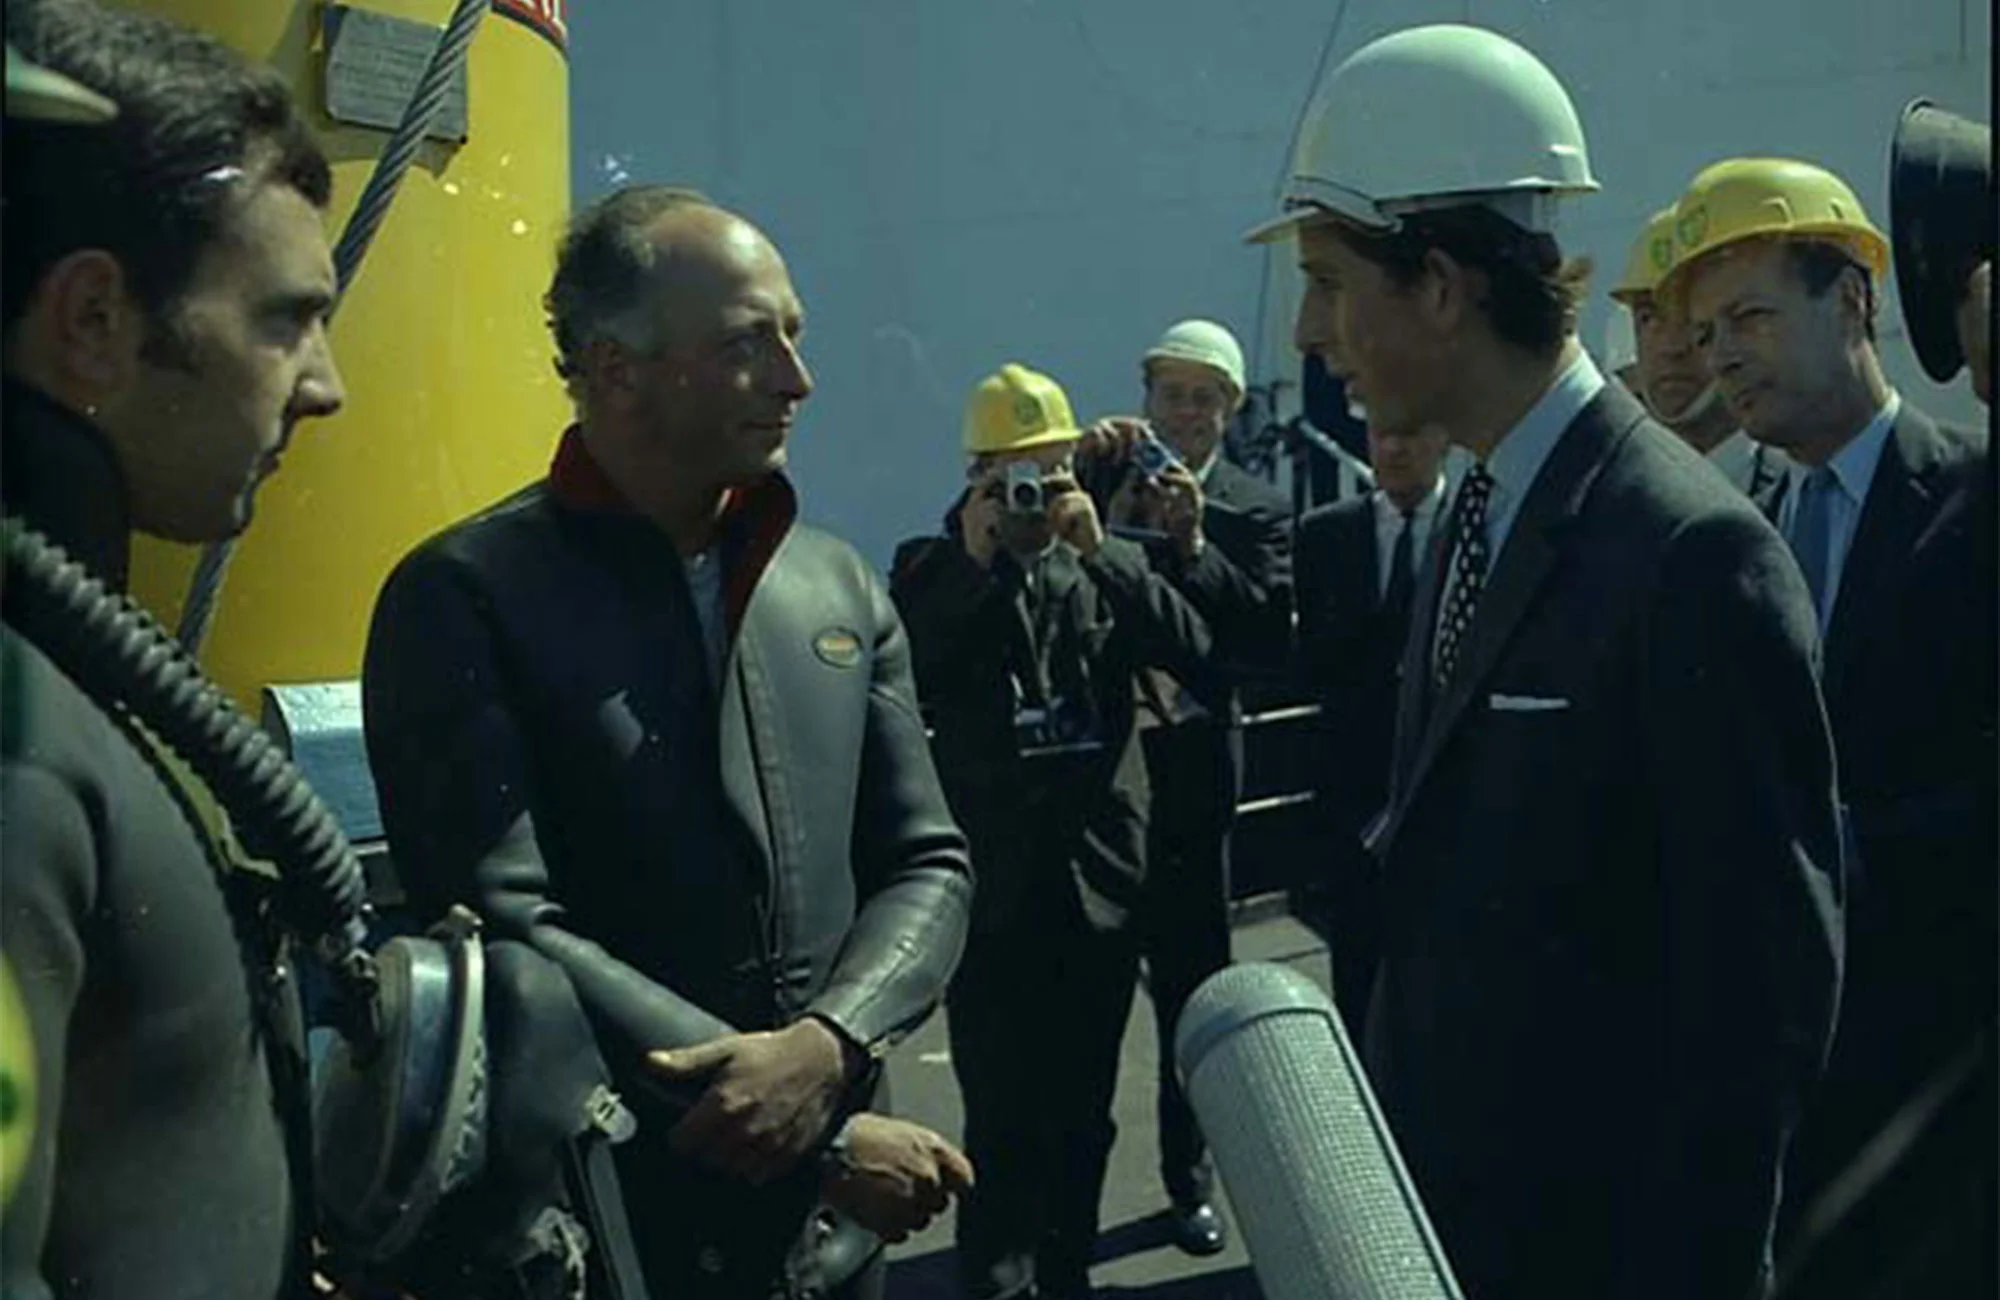 Prince Charles visits bp’s Sea Quest drilling rig in the North Sea